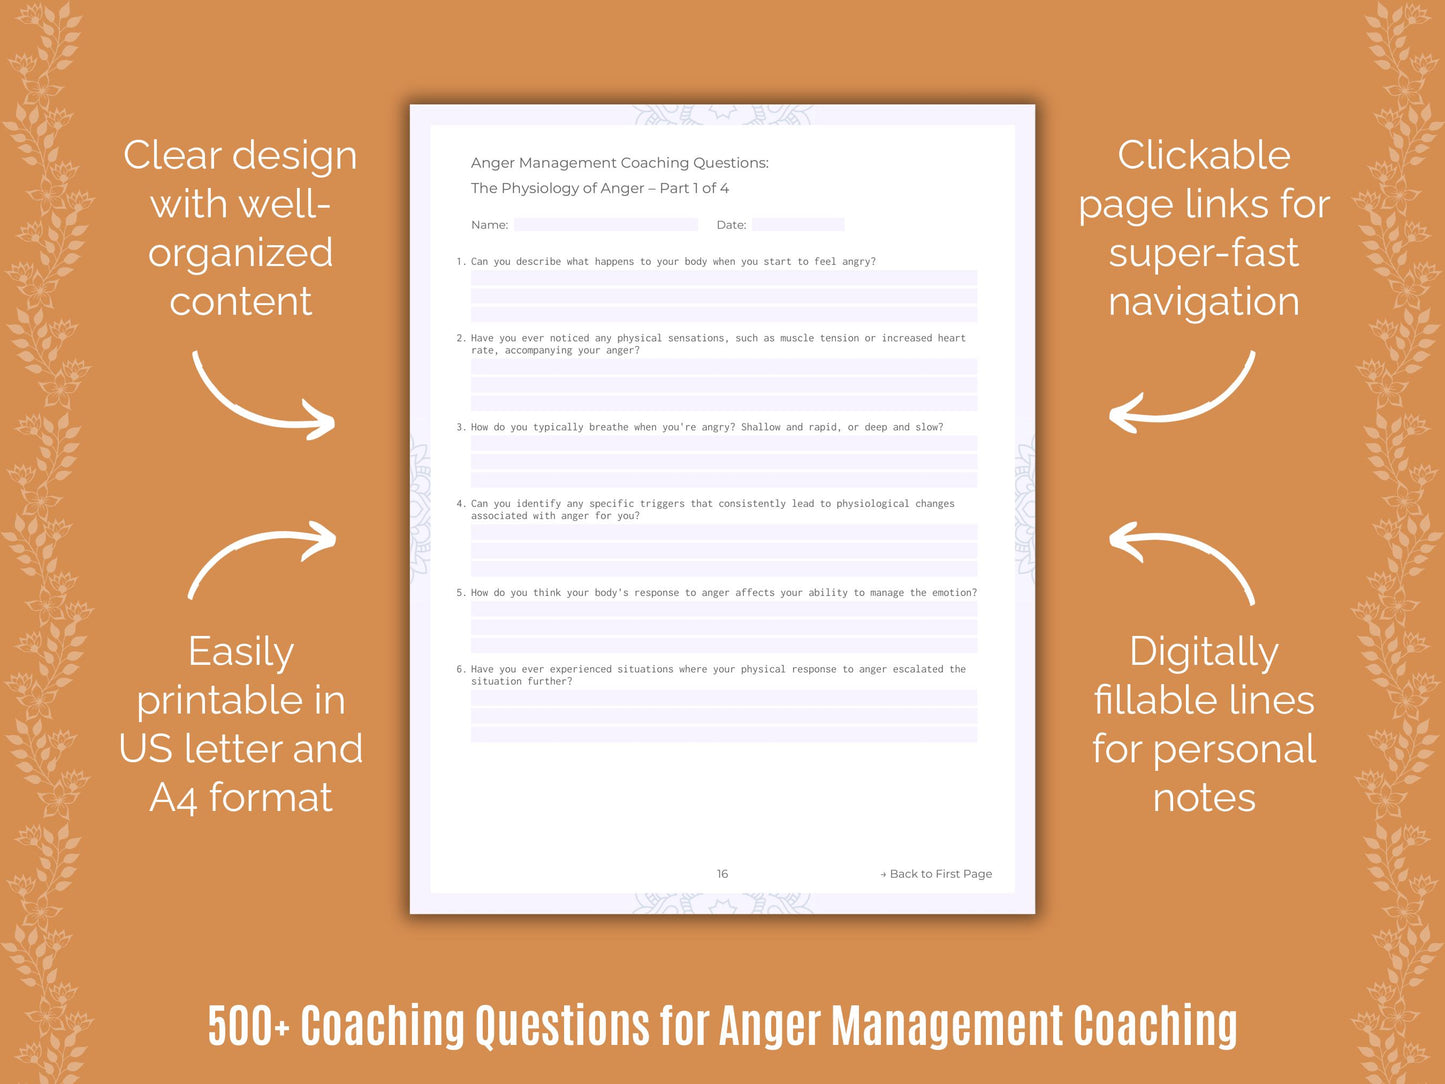 Anger Management Coaching Questions Resource